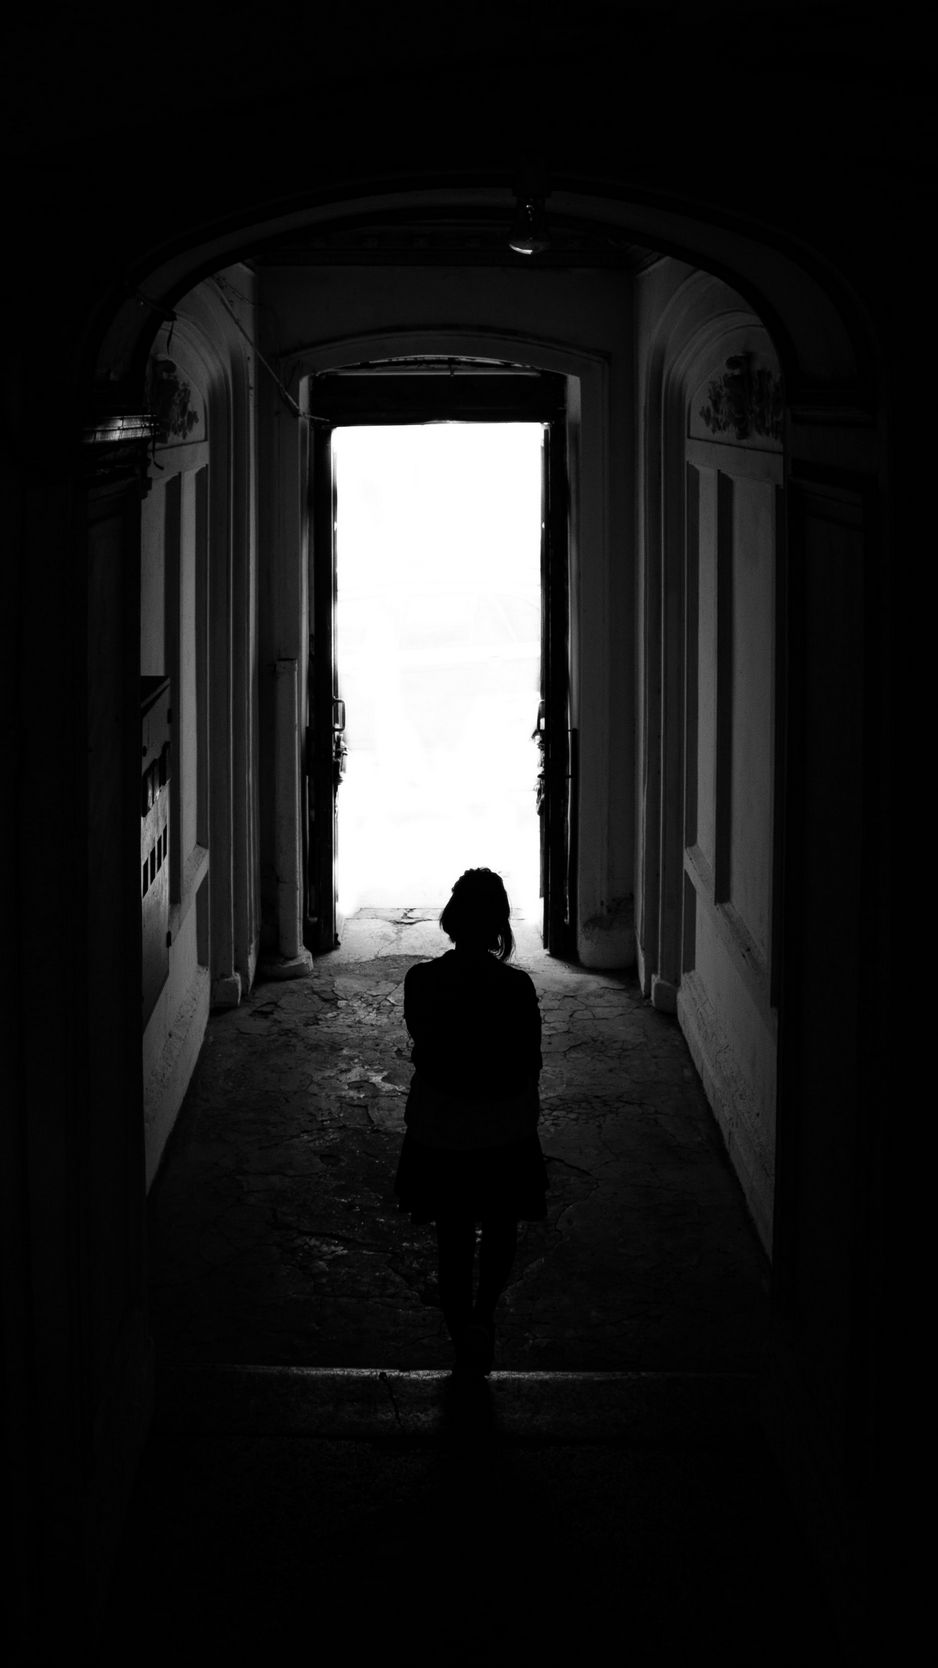 Download wallpaper 938x1668 loneliness, alone, girl, silhouette, dark, black  iphone 8/7/6s/6 for parallax hd background